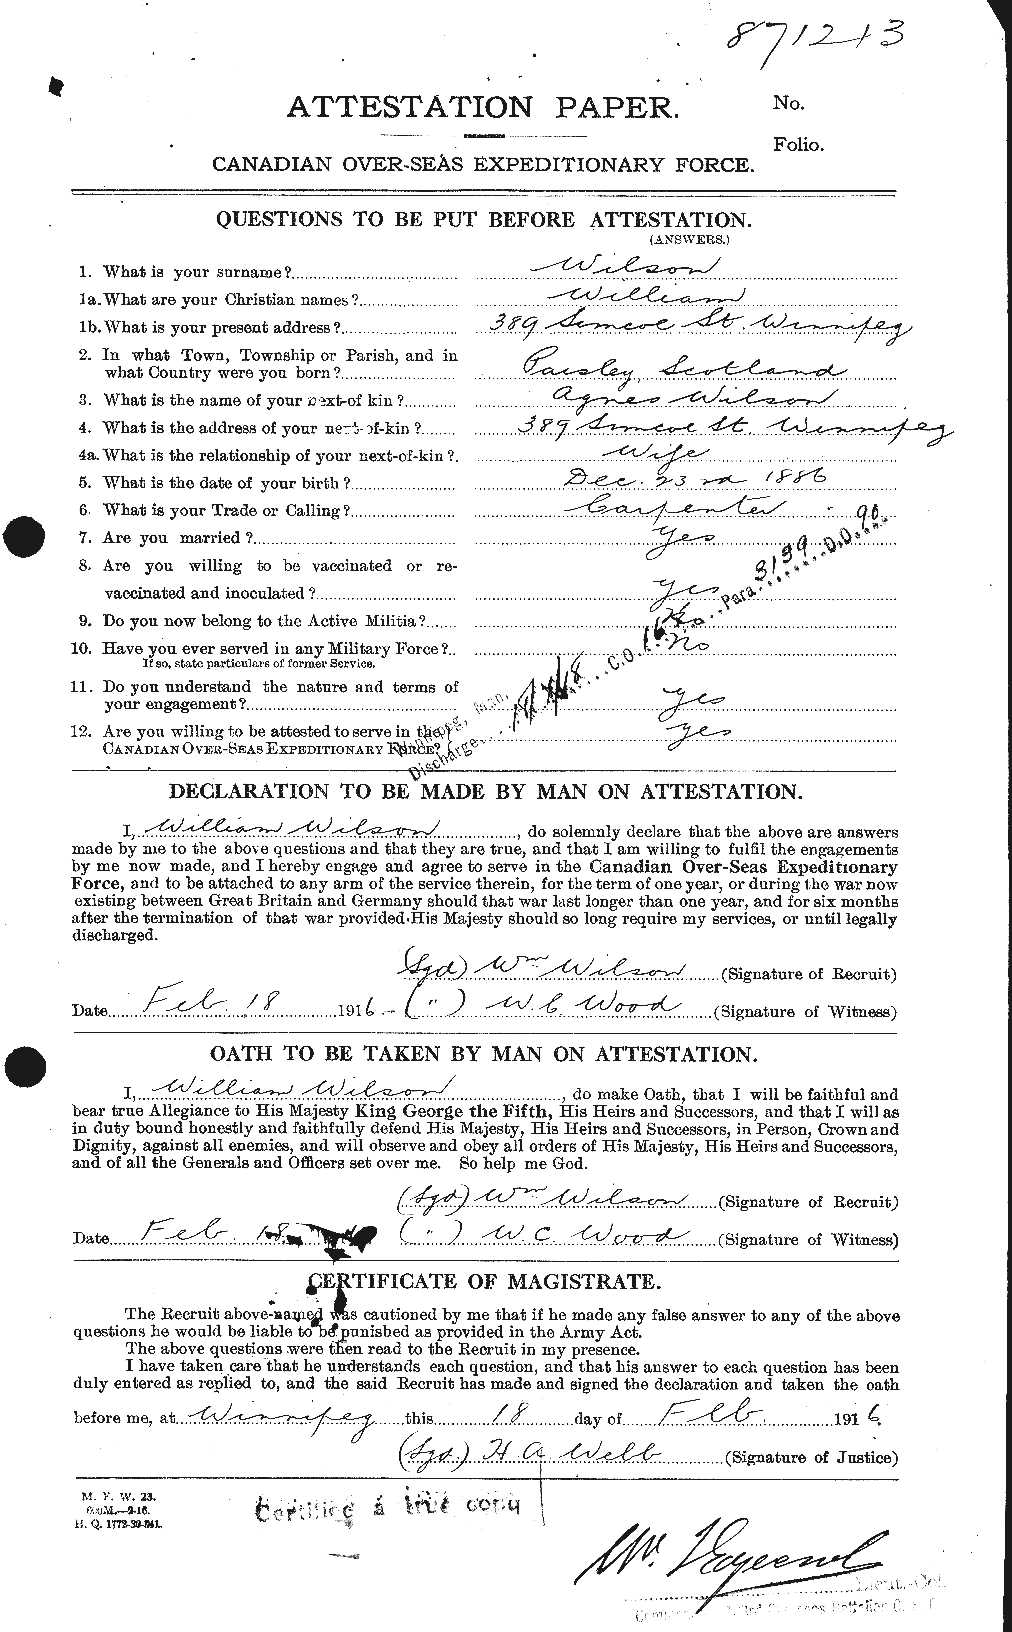 Personnel Records of the First World War - CEF 681893a